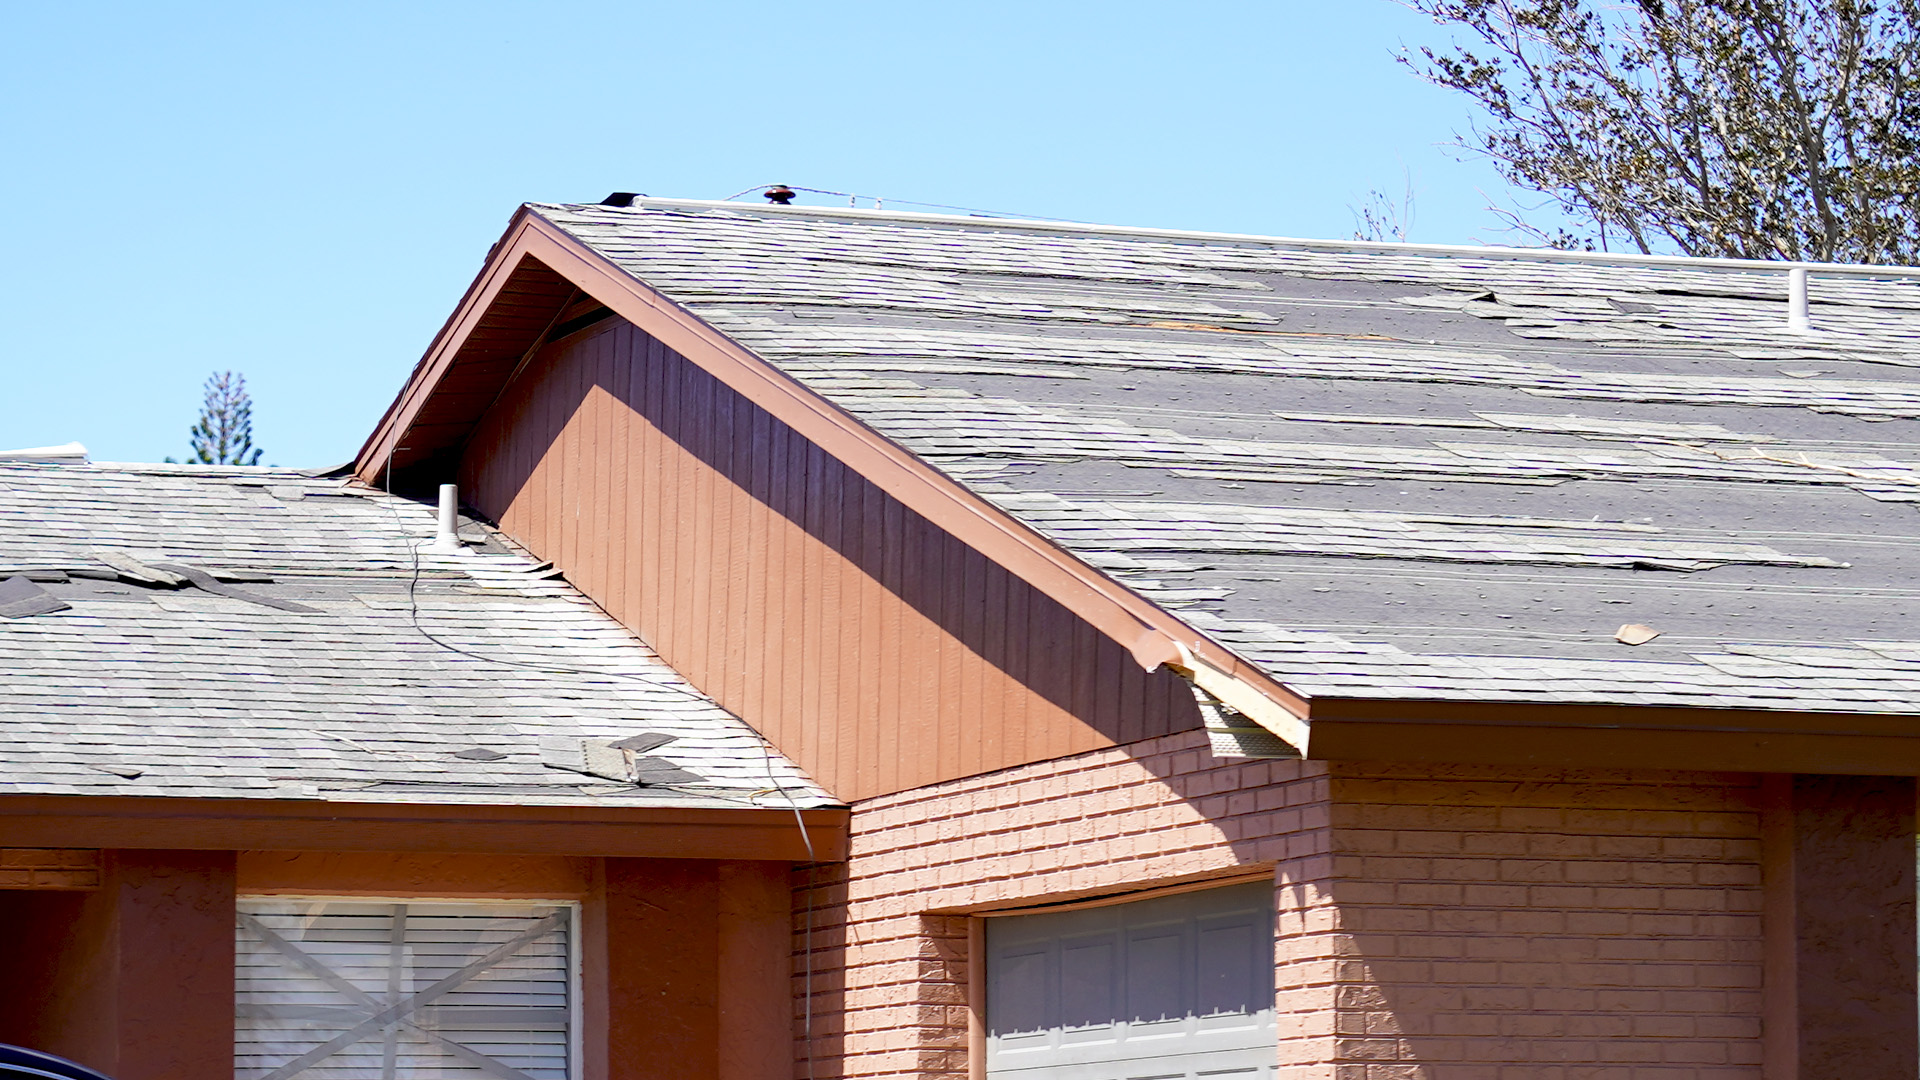 Filing a roof damage claim with your homeowner's insurance company?